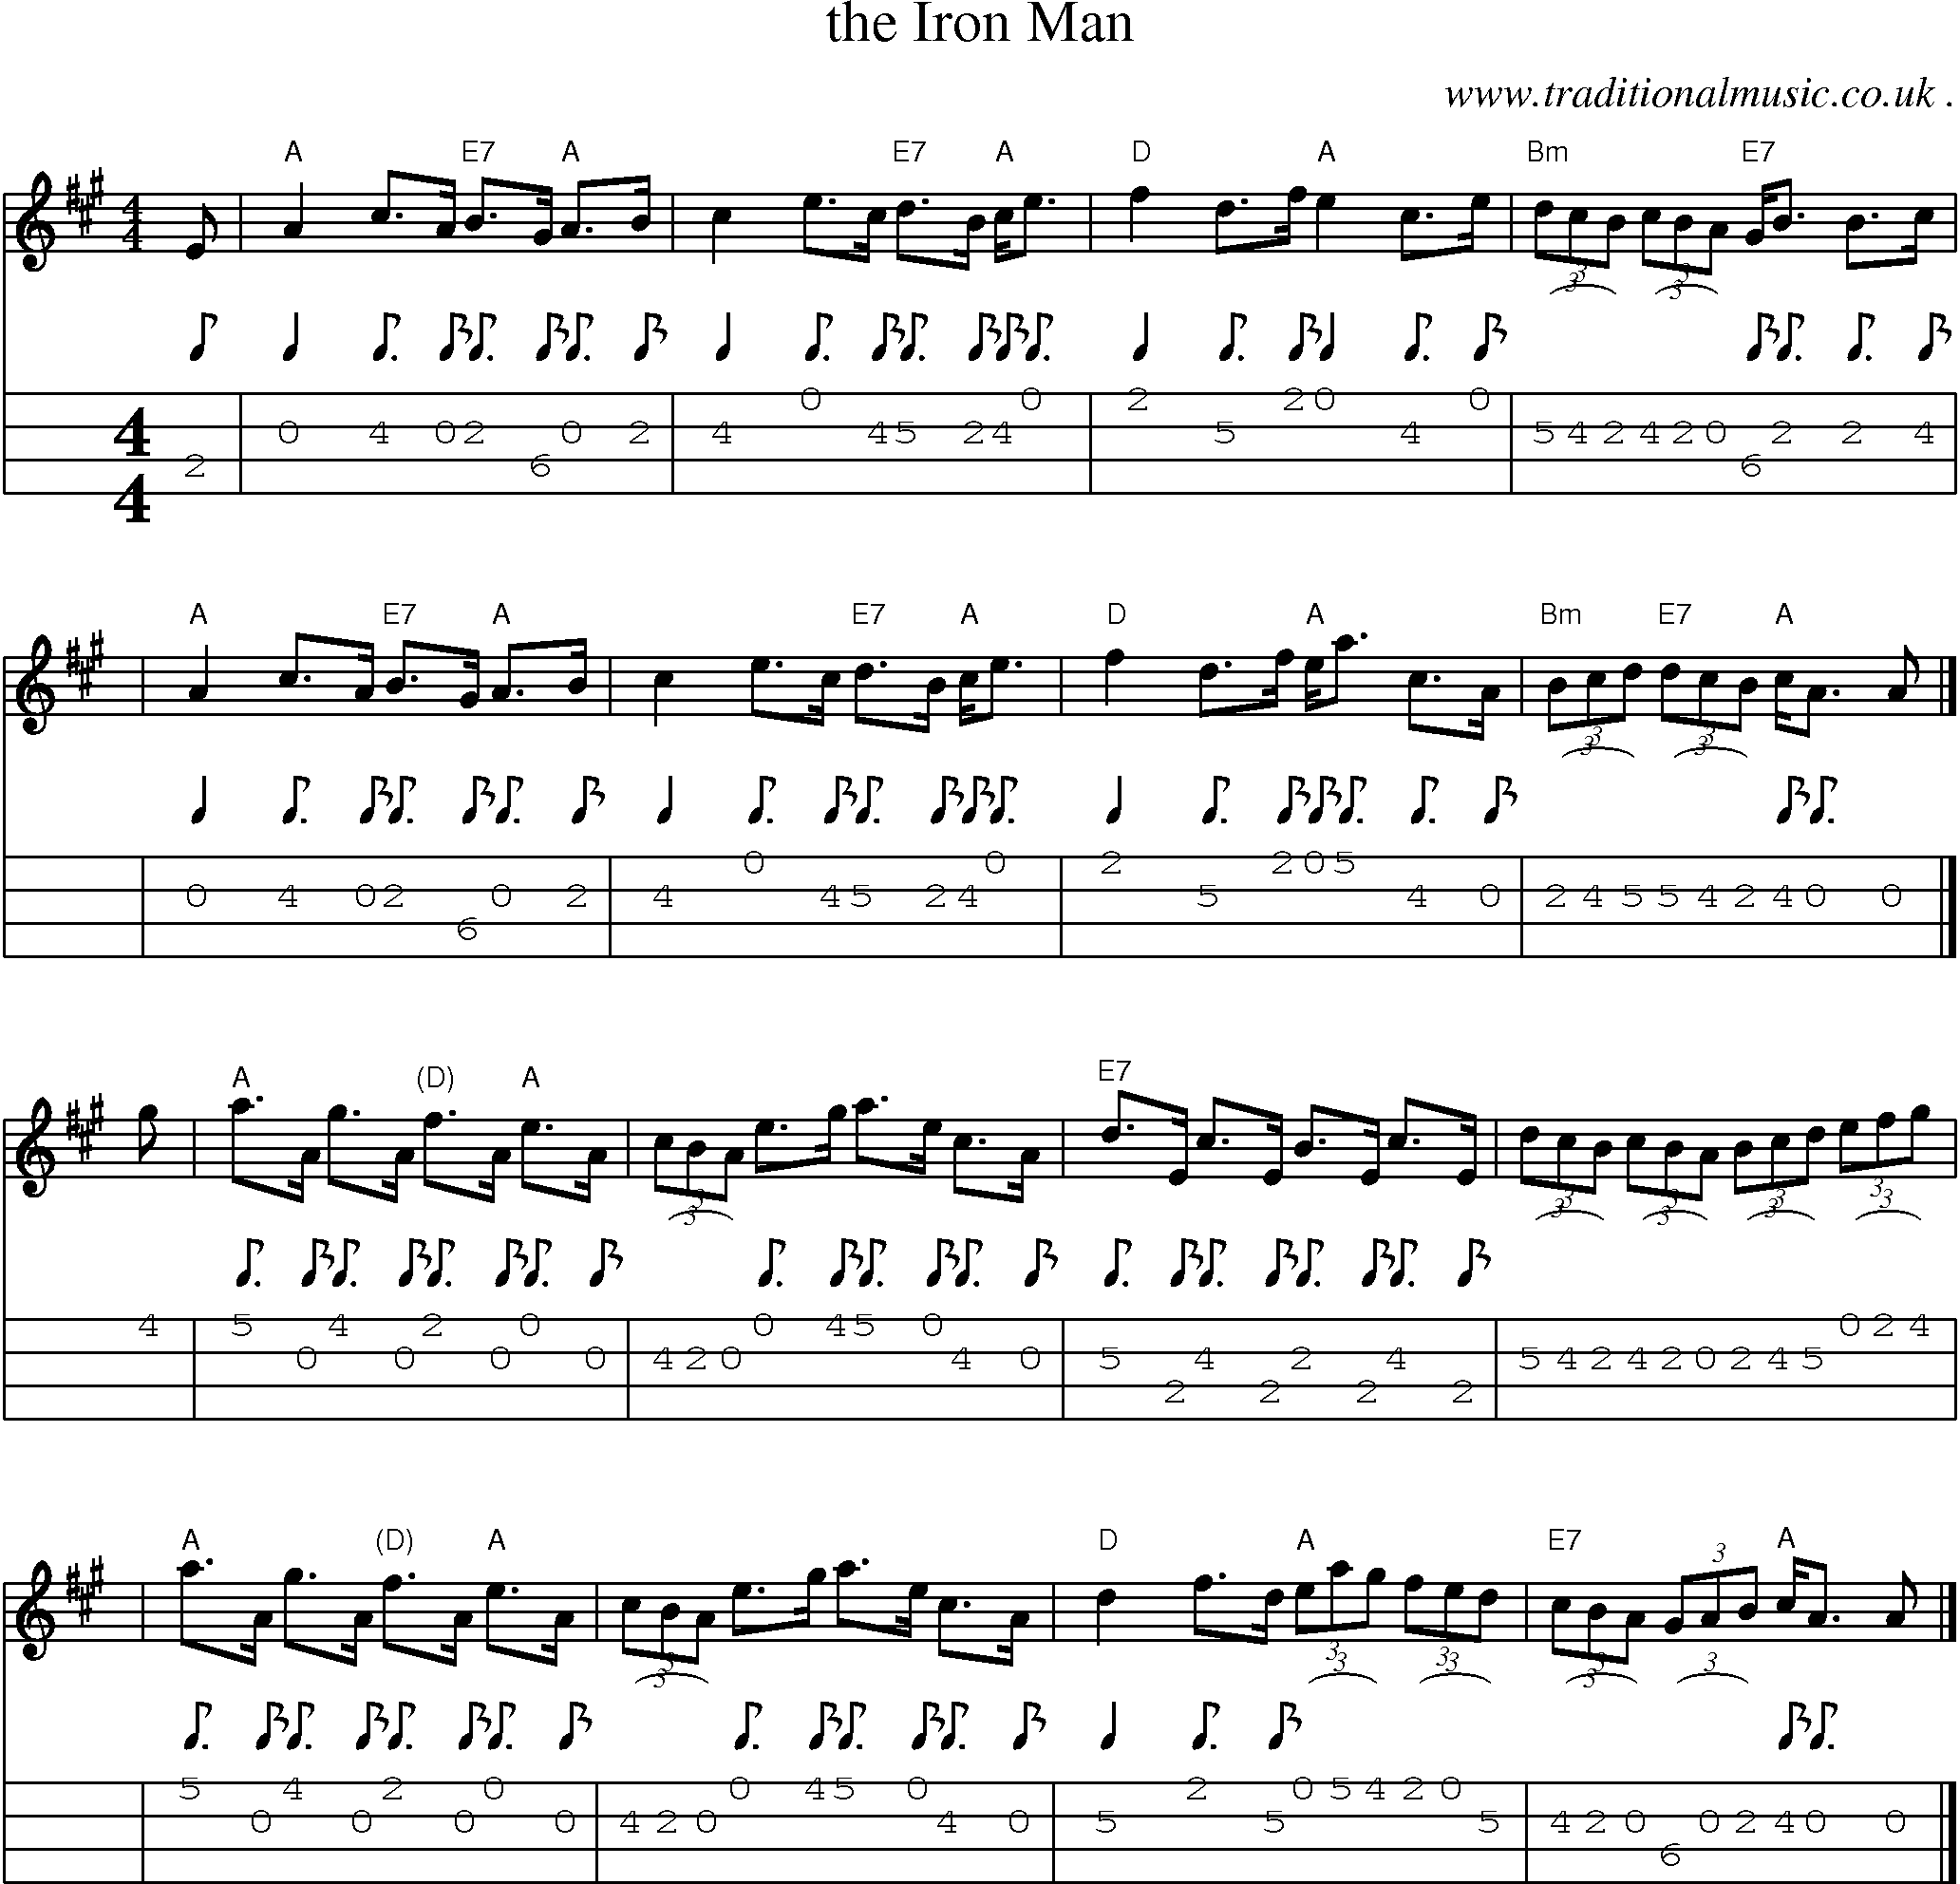 Sheet-music  score, Chords and Mandolin Tabs for The Iron Man